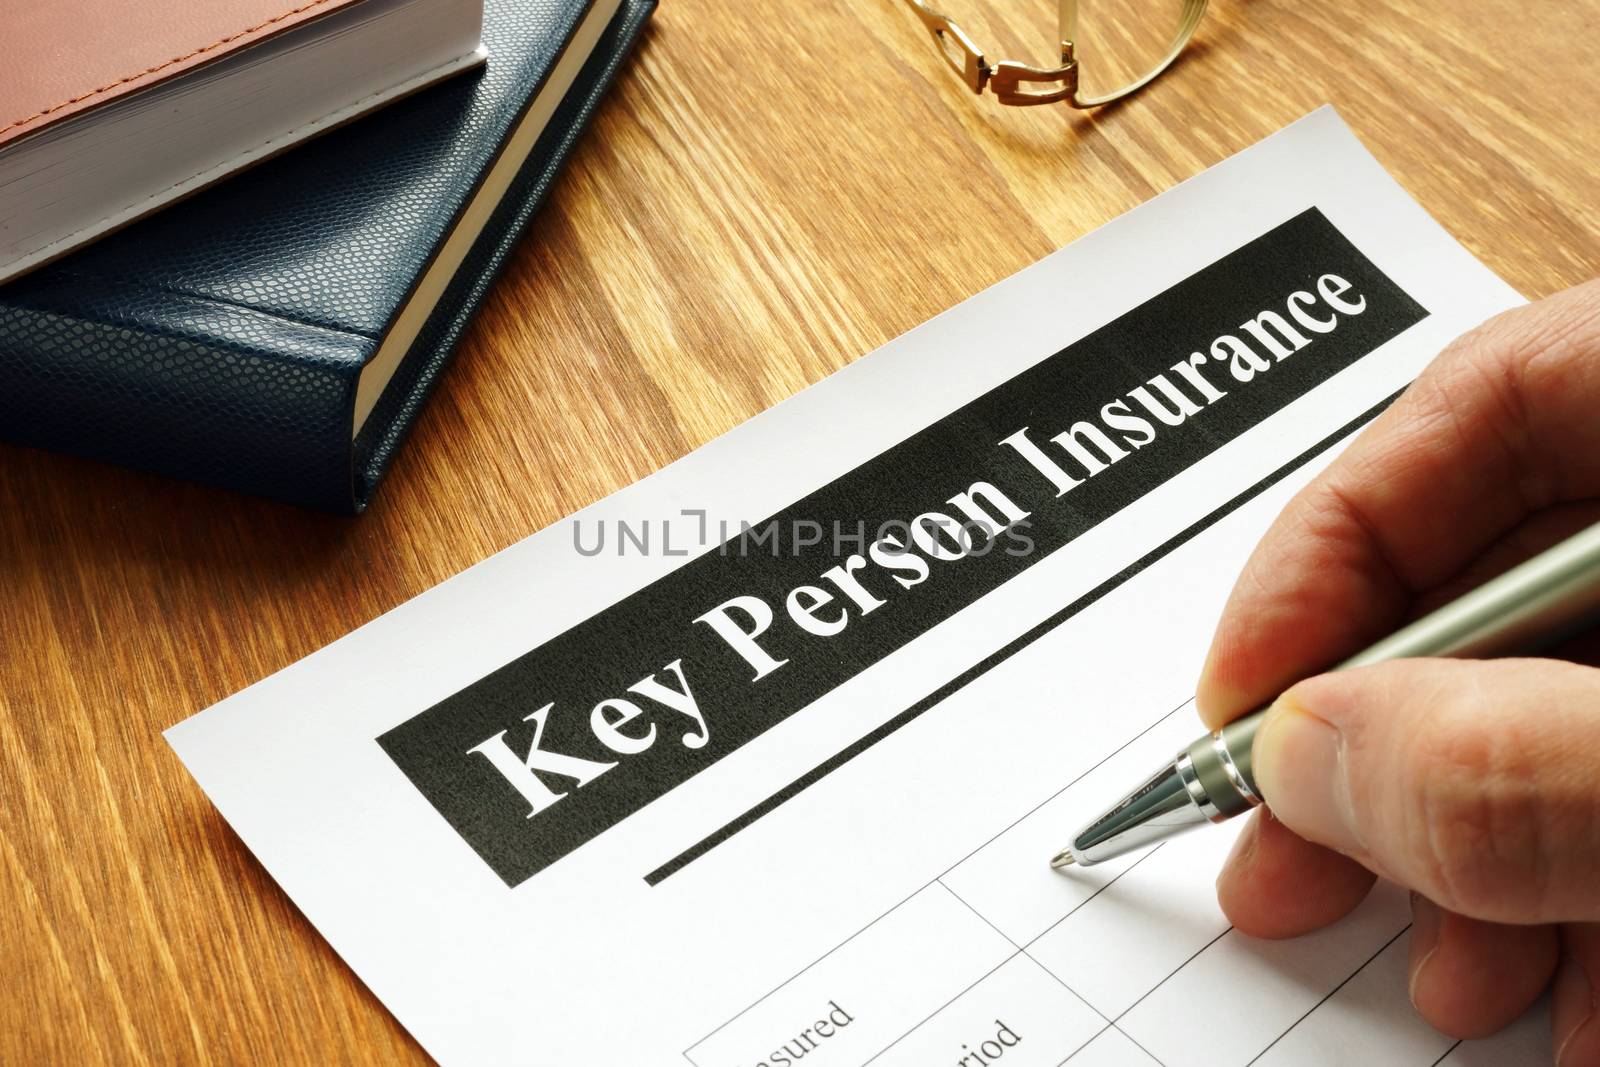 Key Person Insurance policy agreement on teble. by designer491